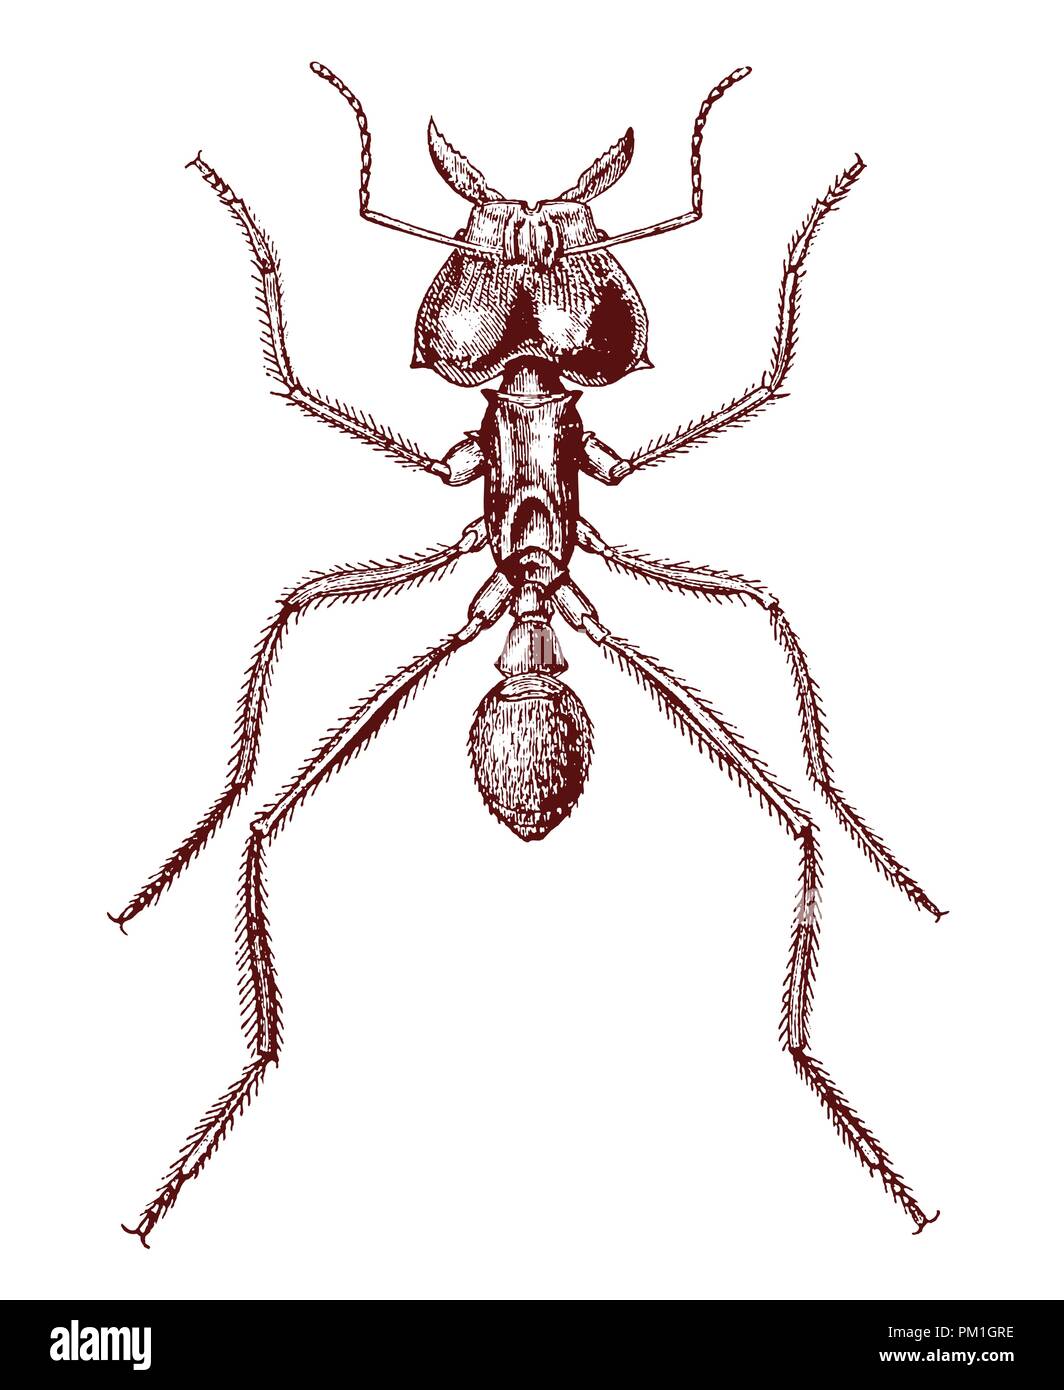 Leafcutter ant (atta cephalotes) in top view. Illustration after a historic lithography or engraving from the early 19th century Stock Vector